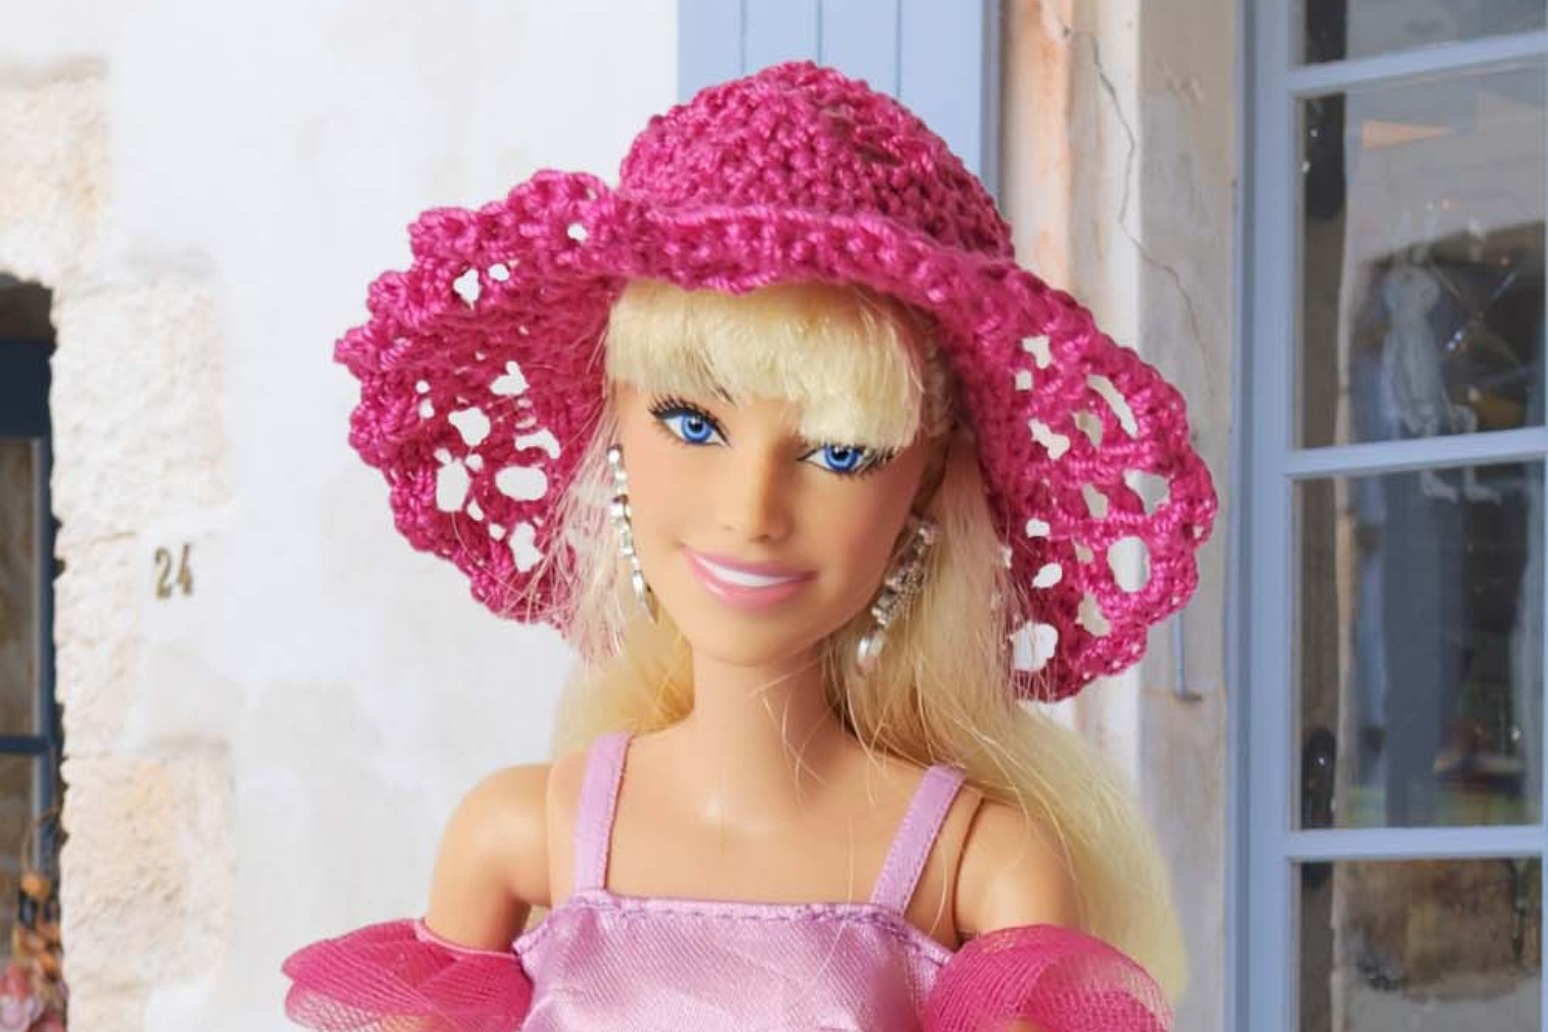 Canadian government official who crochets Barbie outfits praises ‘hopeful’ film 